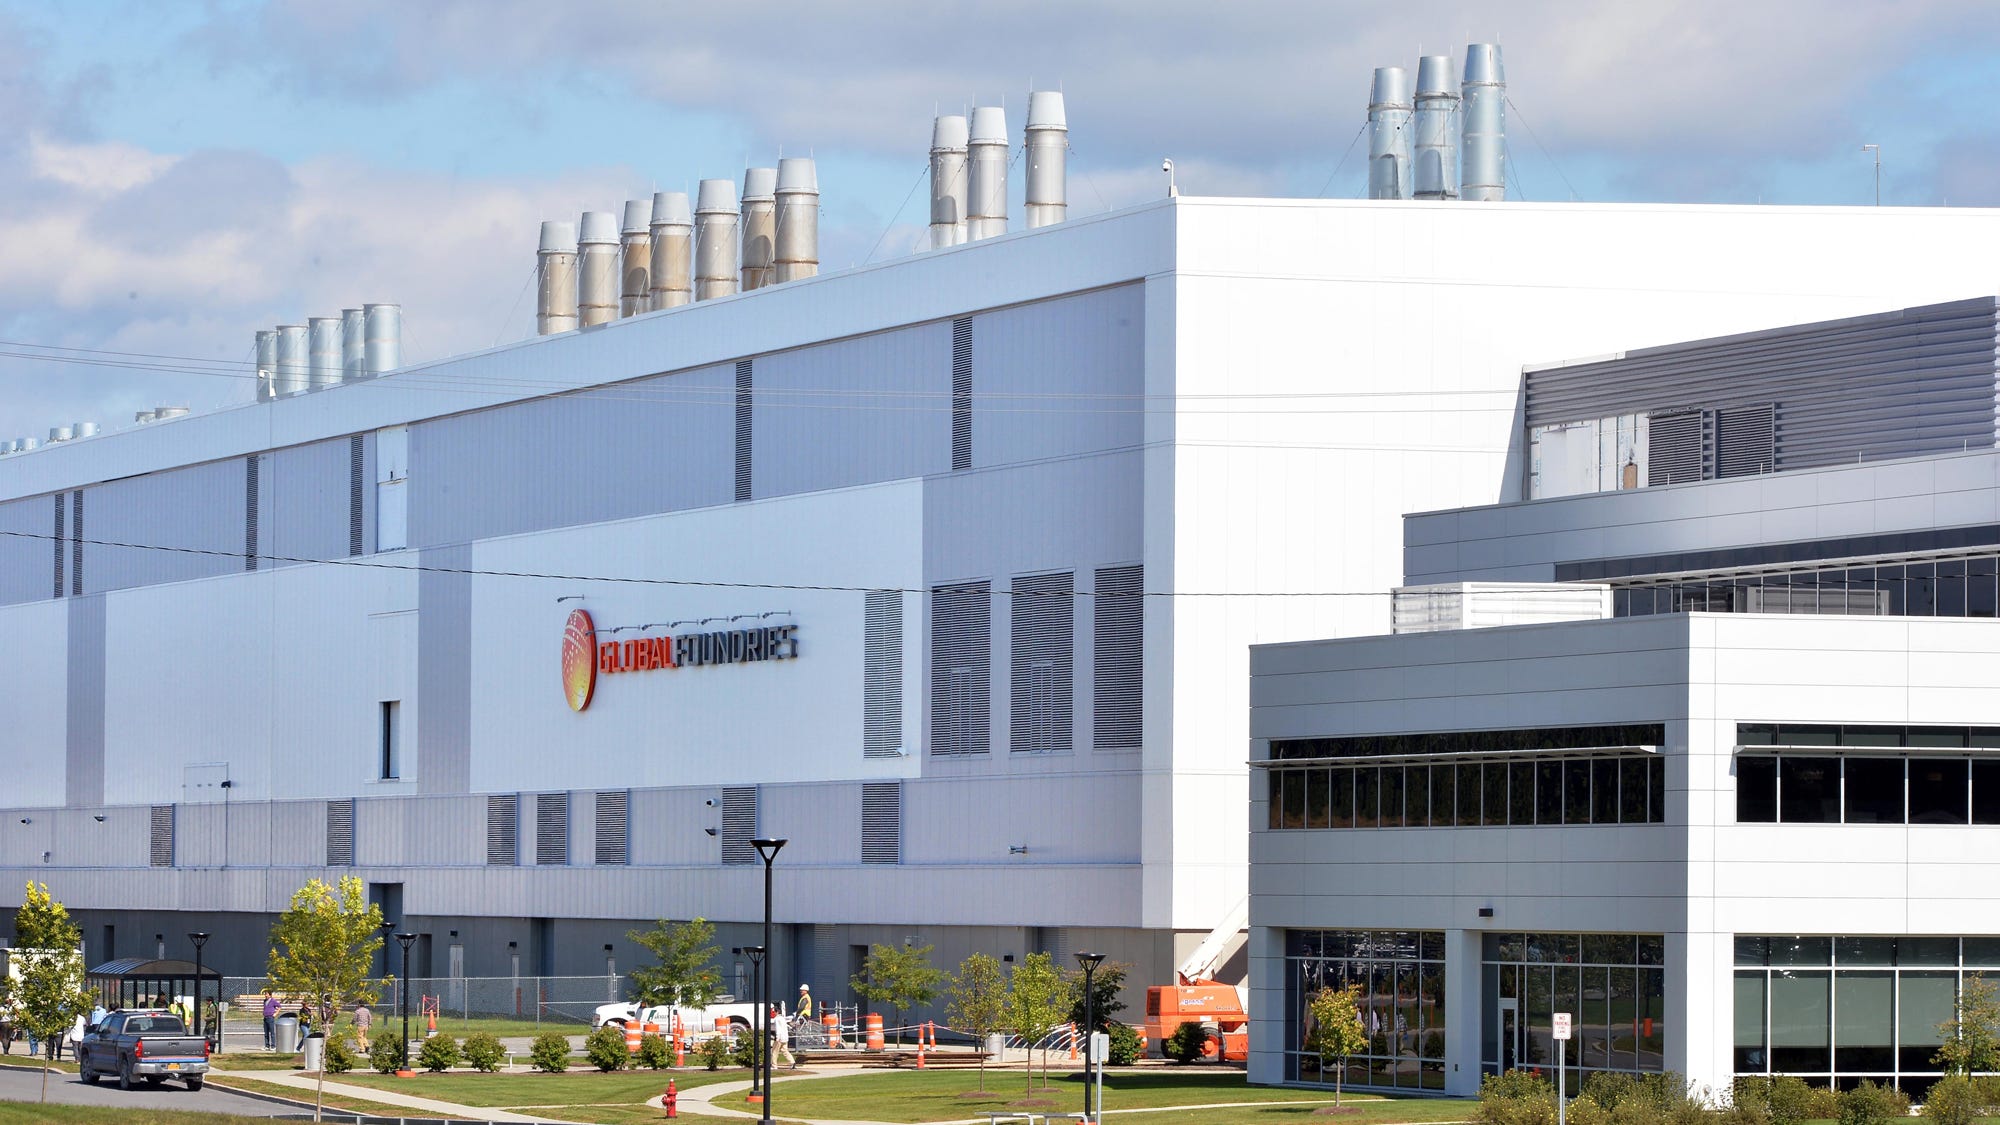 GlobalFoundries: From micro to global